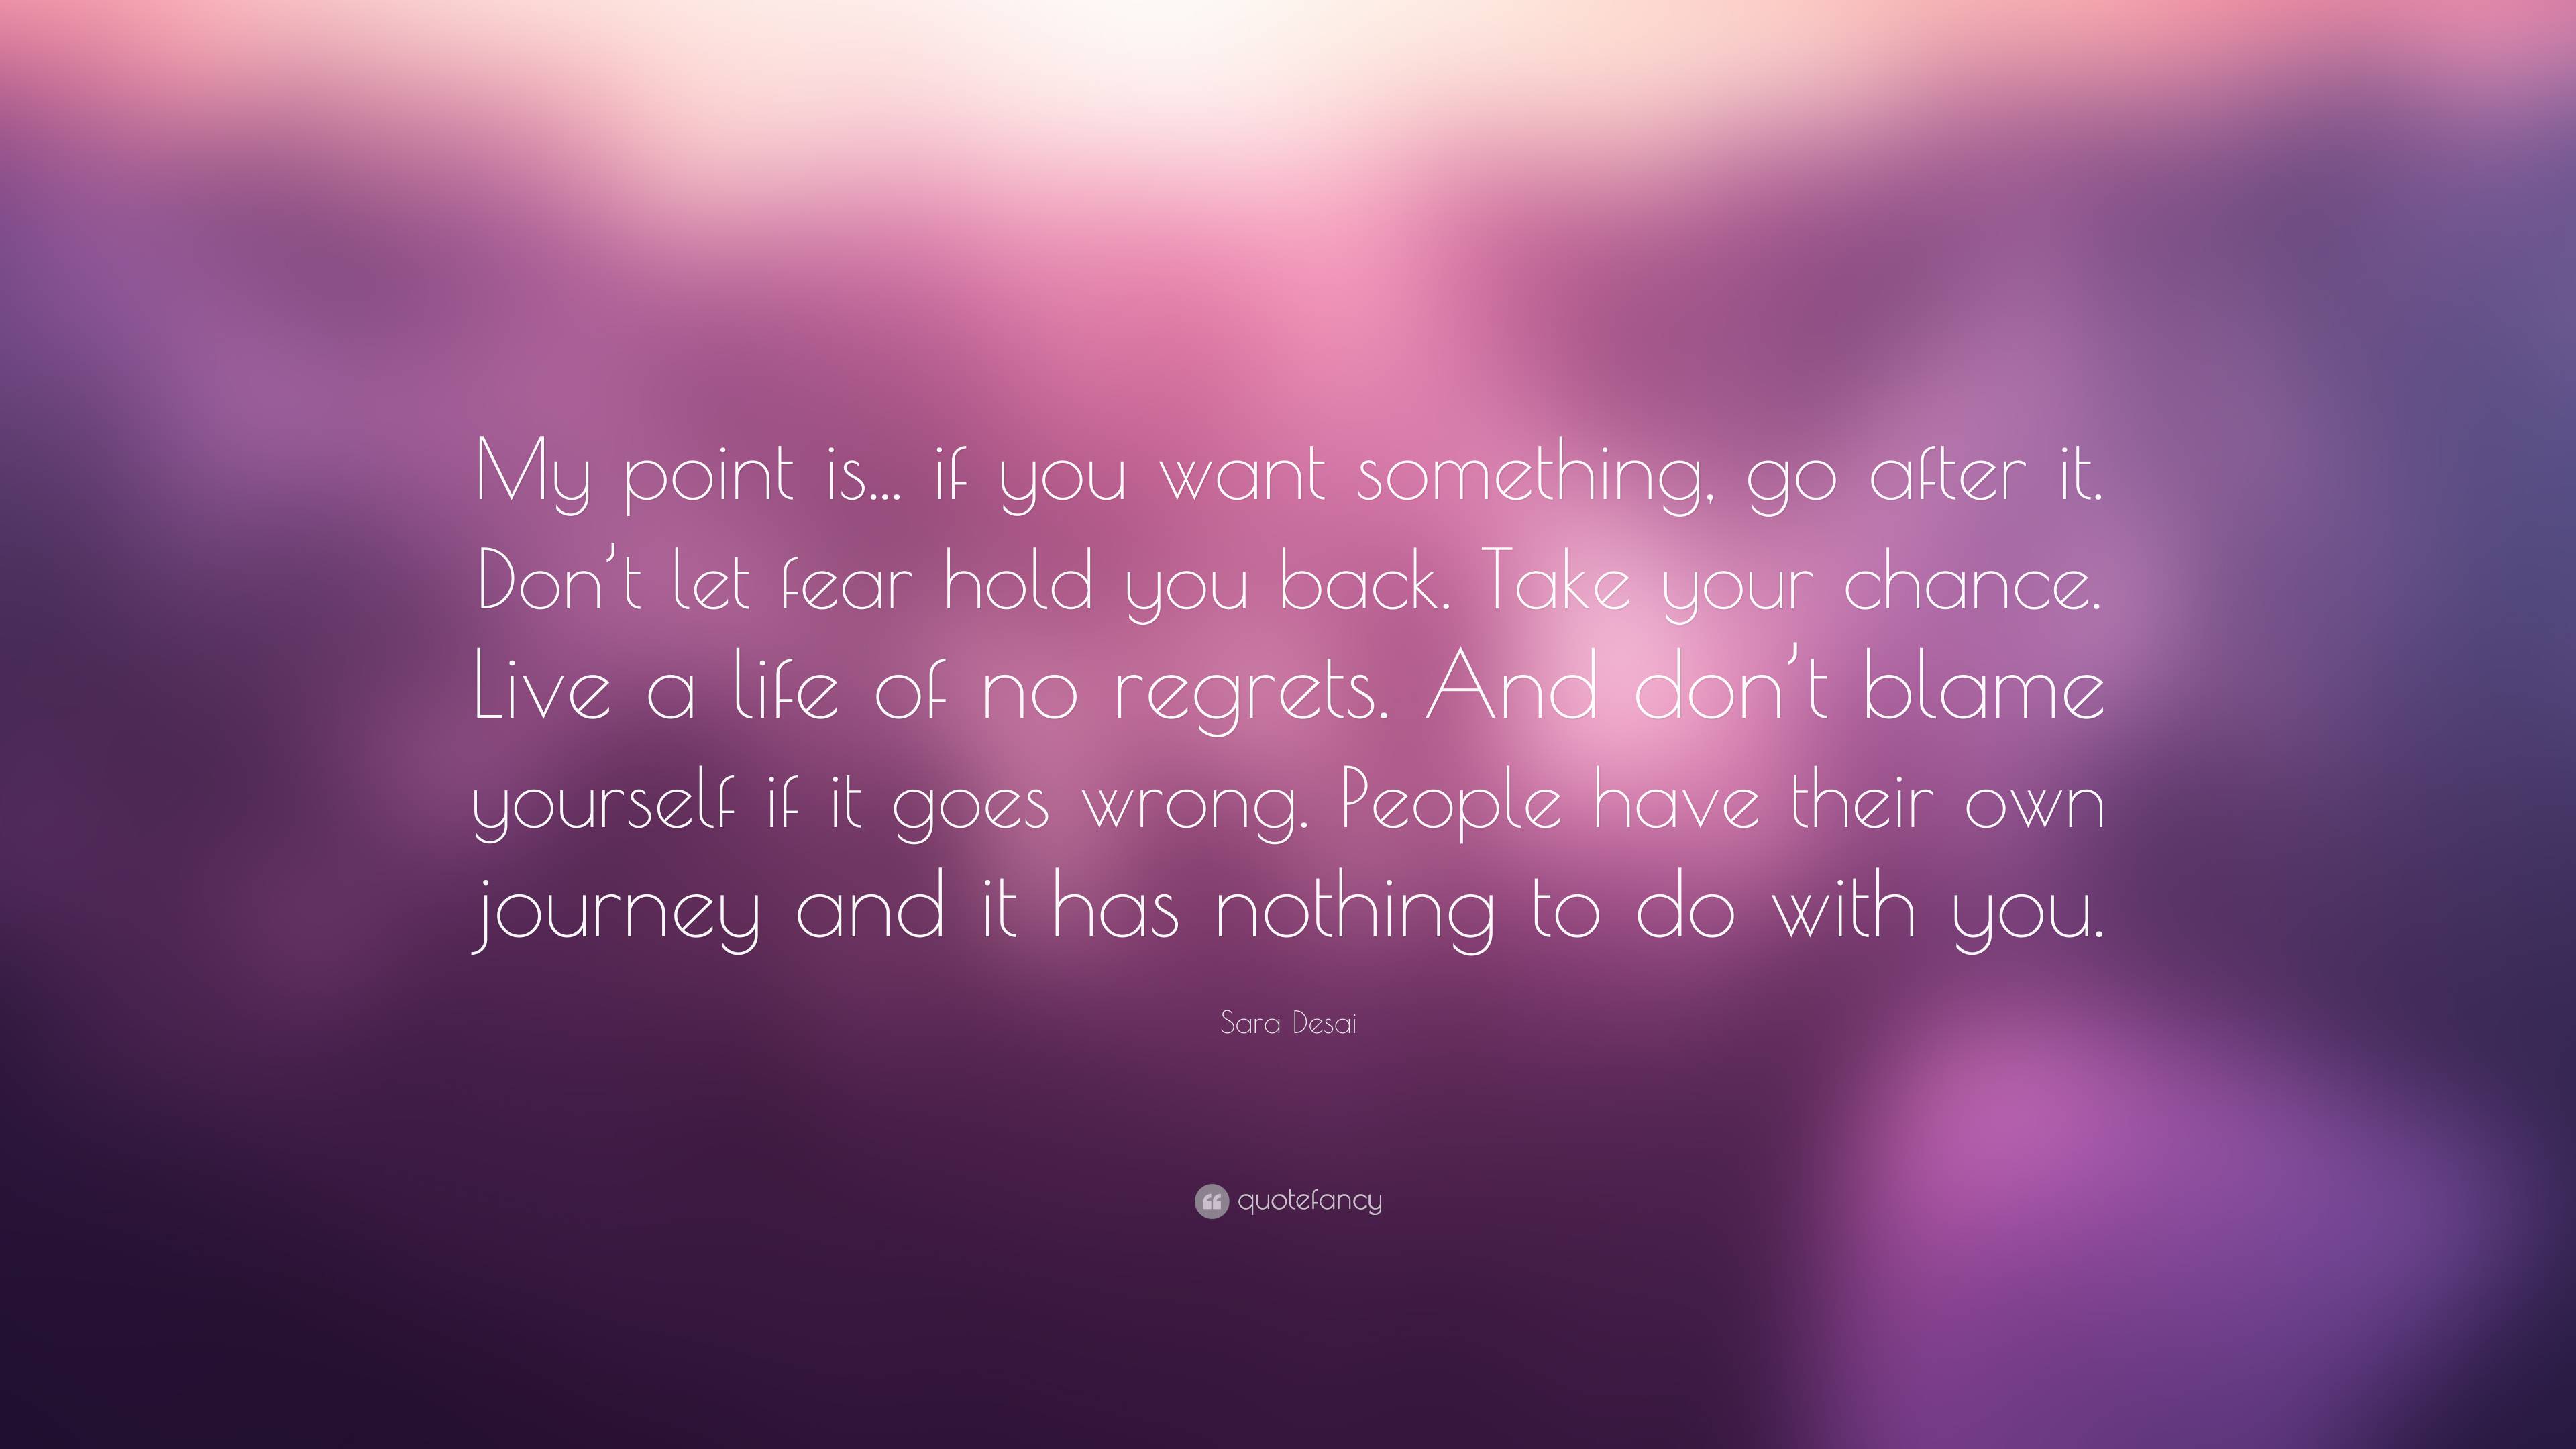 https://quotefancy.com/media/wallpaper/3840x2160/7289926-Sara-Desai-Quote-My-point-is-if-you-want-something-go-after-it-Don.jpg